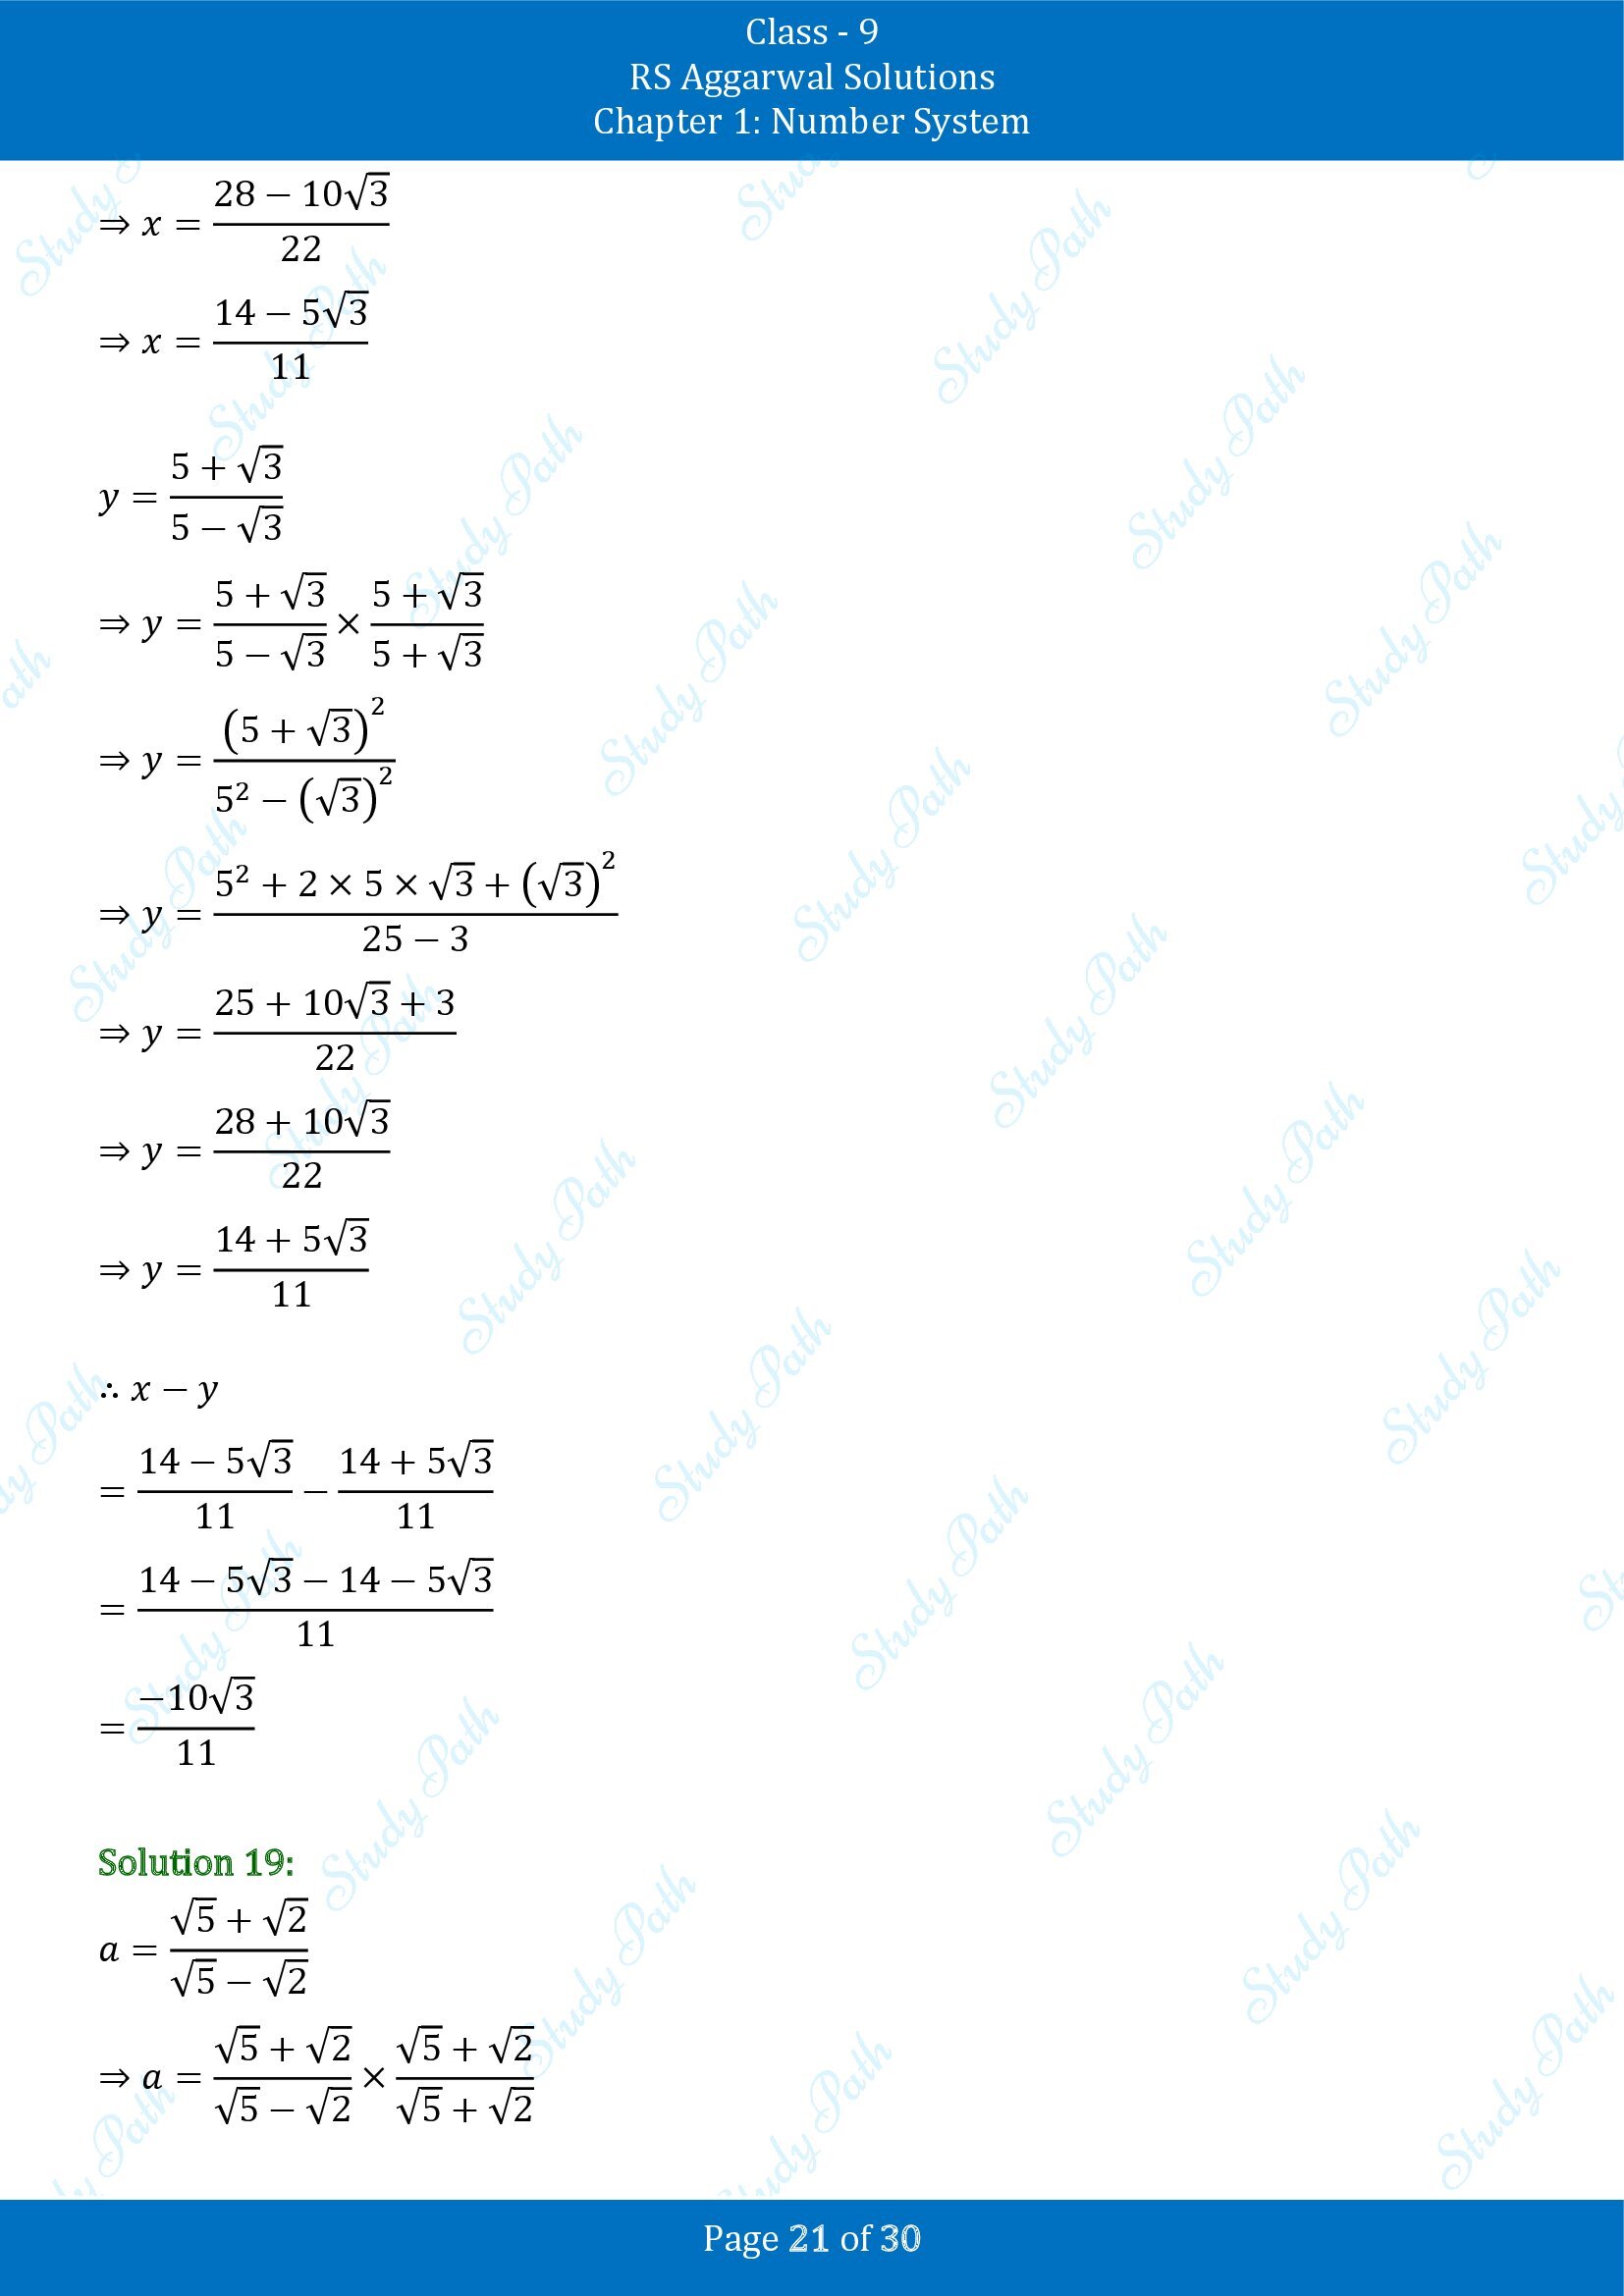 RS Aggarwal Solutions Class 9 Chapter 1 Number System Exercise 1F 00021